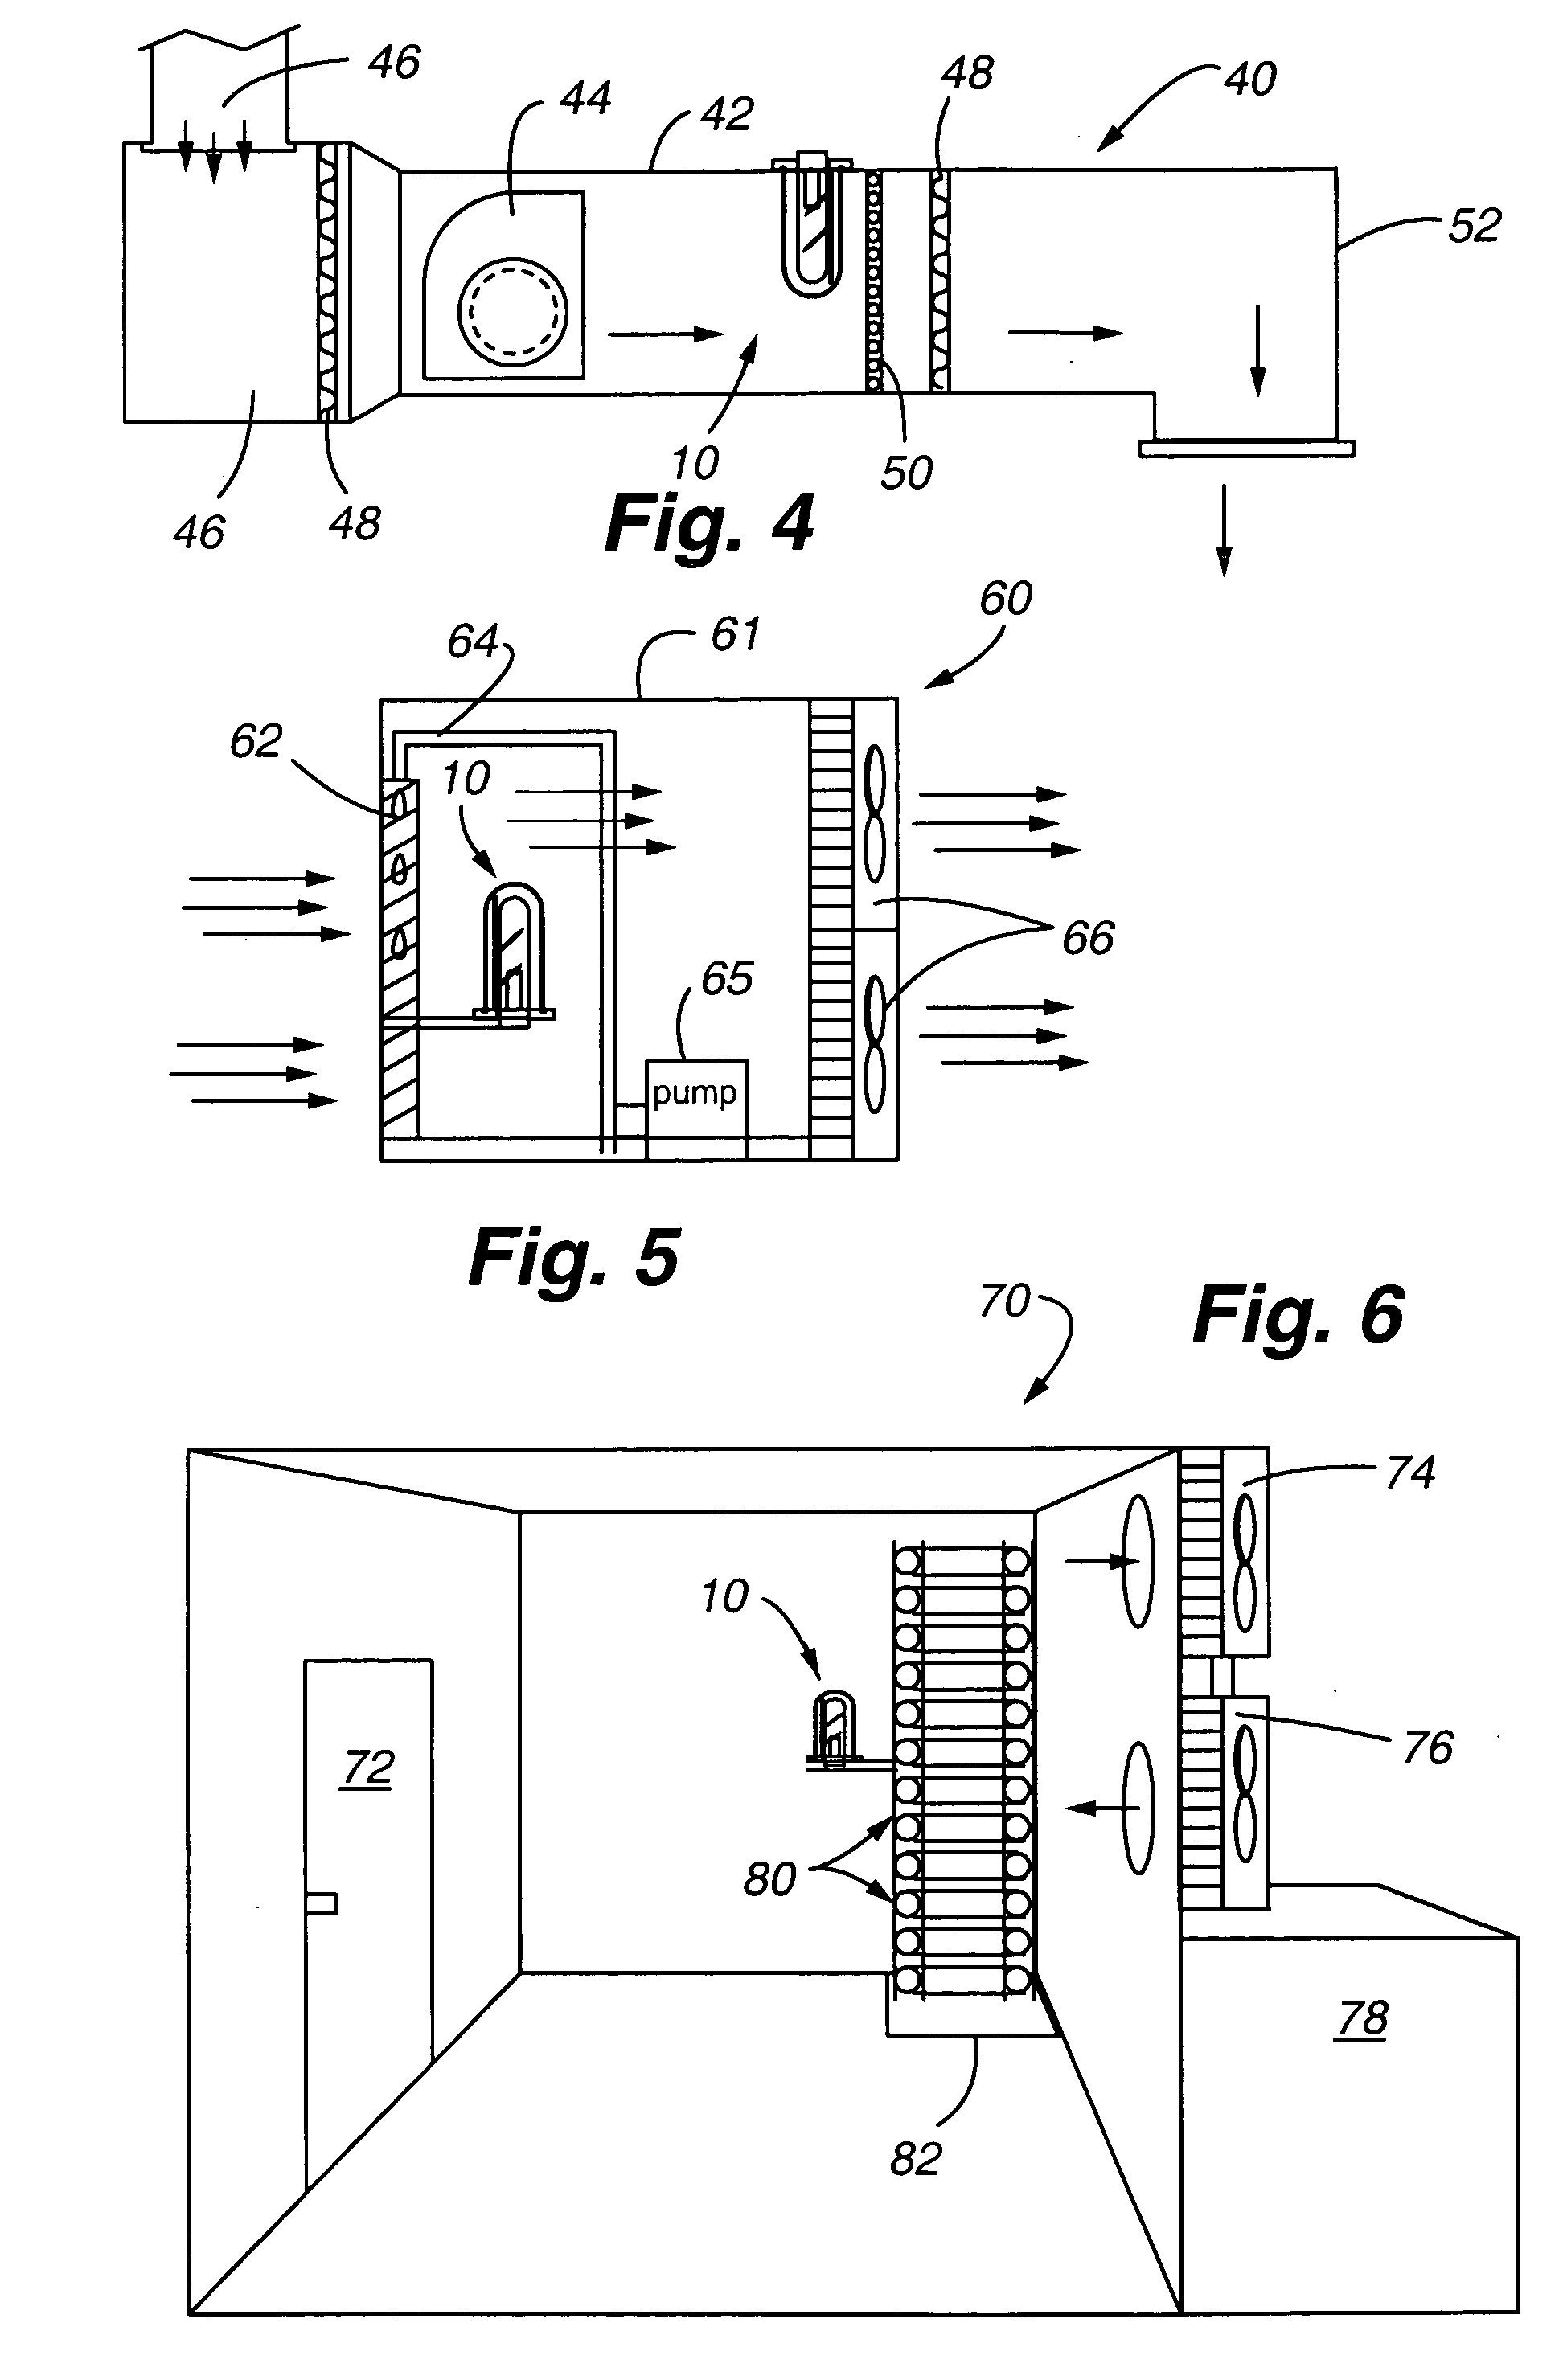 Heat controlled ultraviolet light apparatus and methods of sanitizing objects using said apparatus